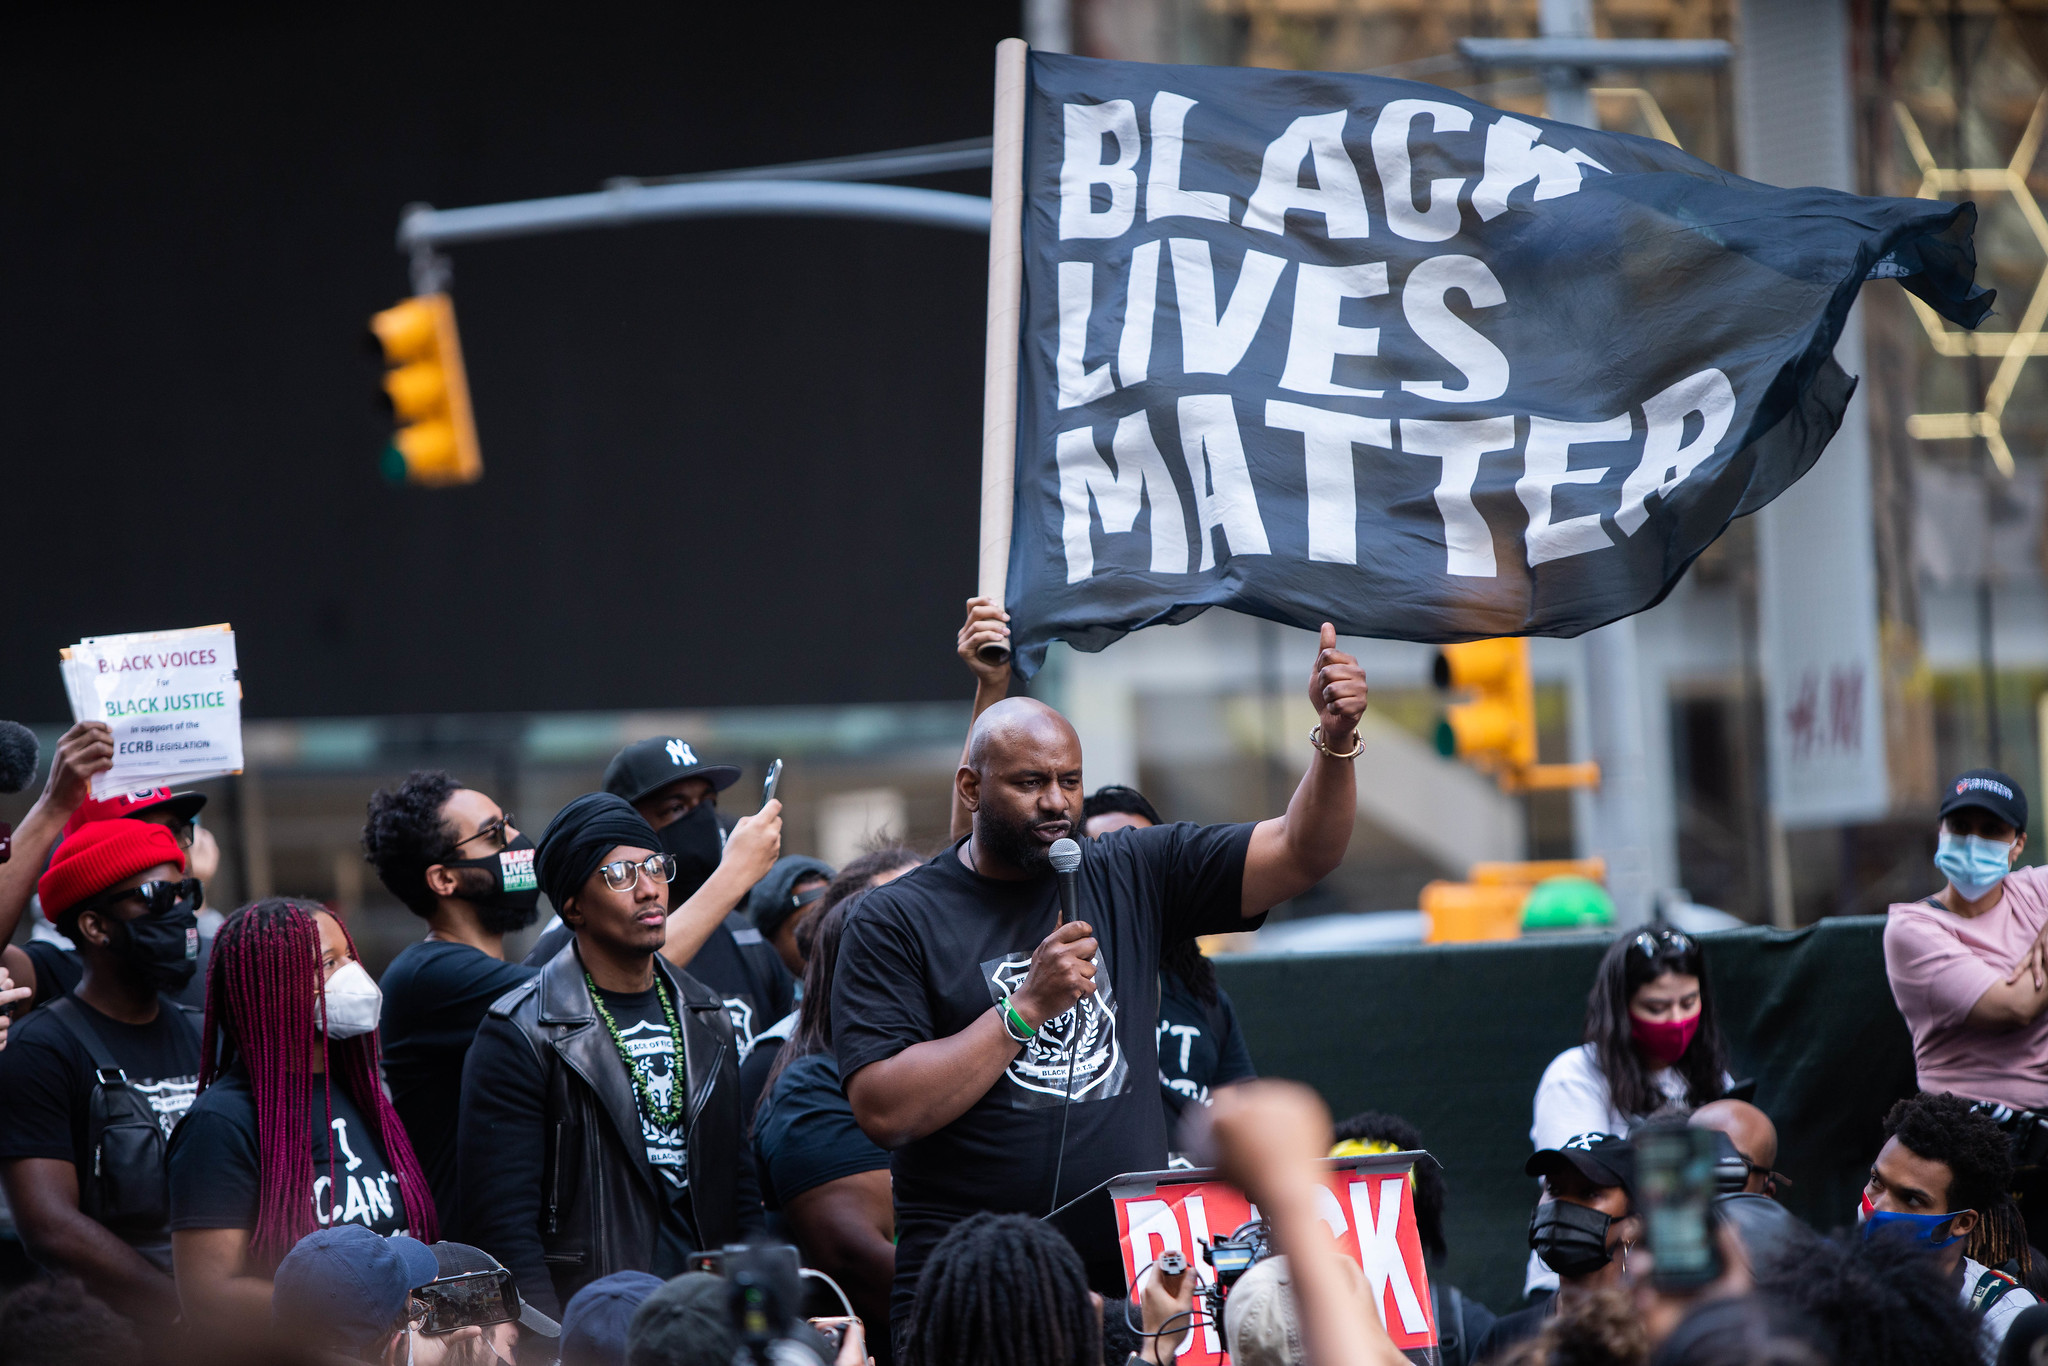 Black lives matter activists executed a shocking $83 billion shakedown of american corporations